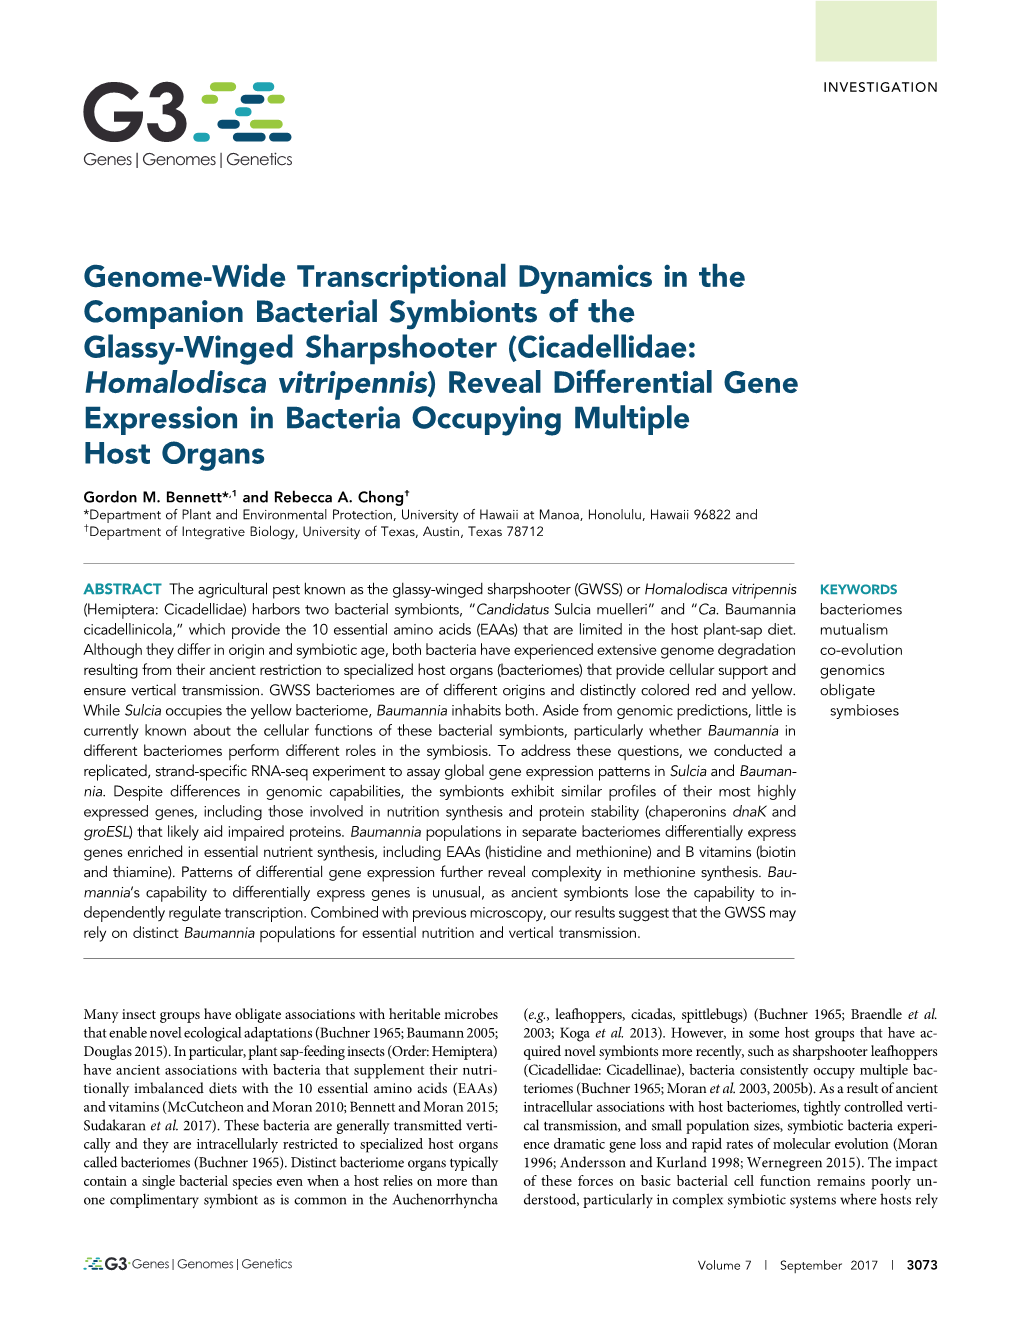 Genome-Wide Transcriptional Dynamics in the Companion Bacterial